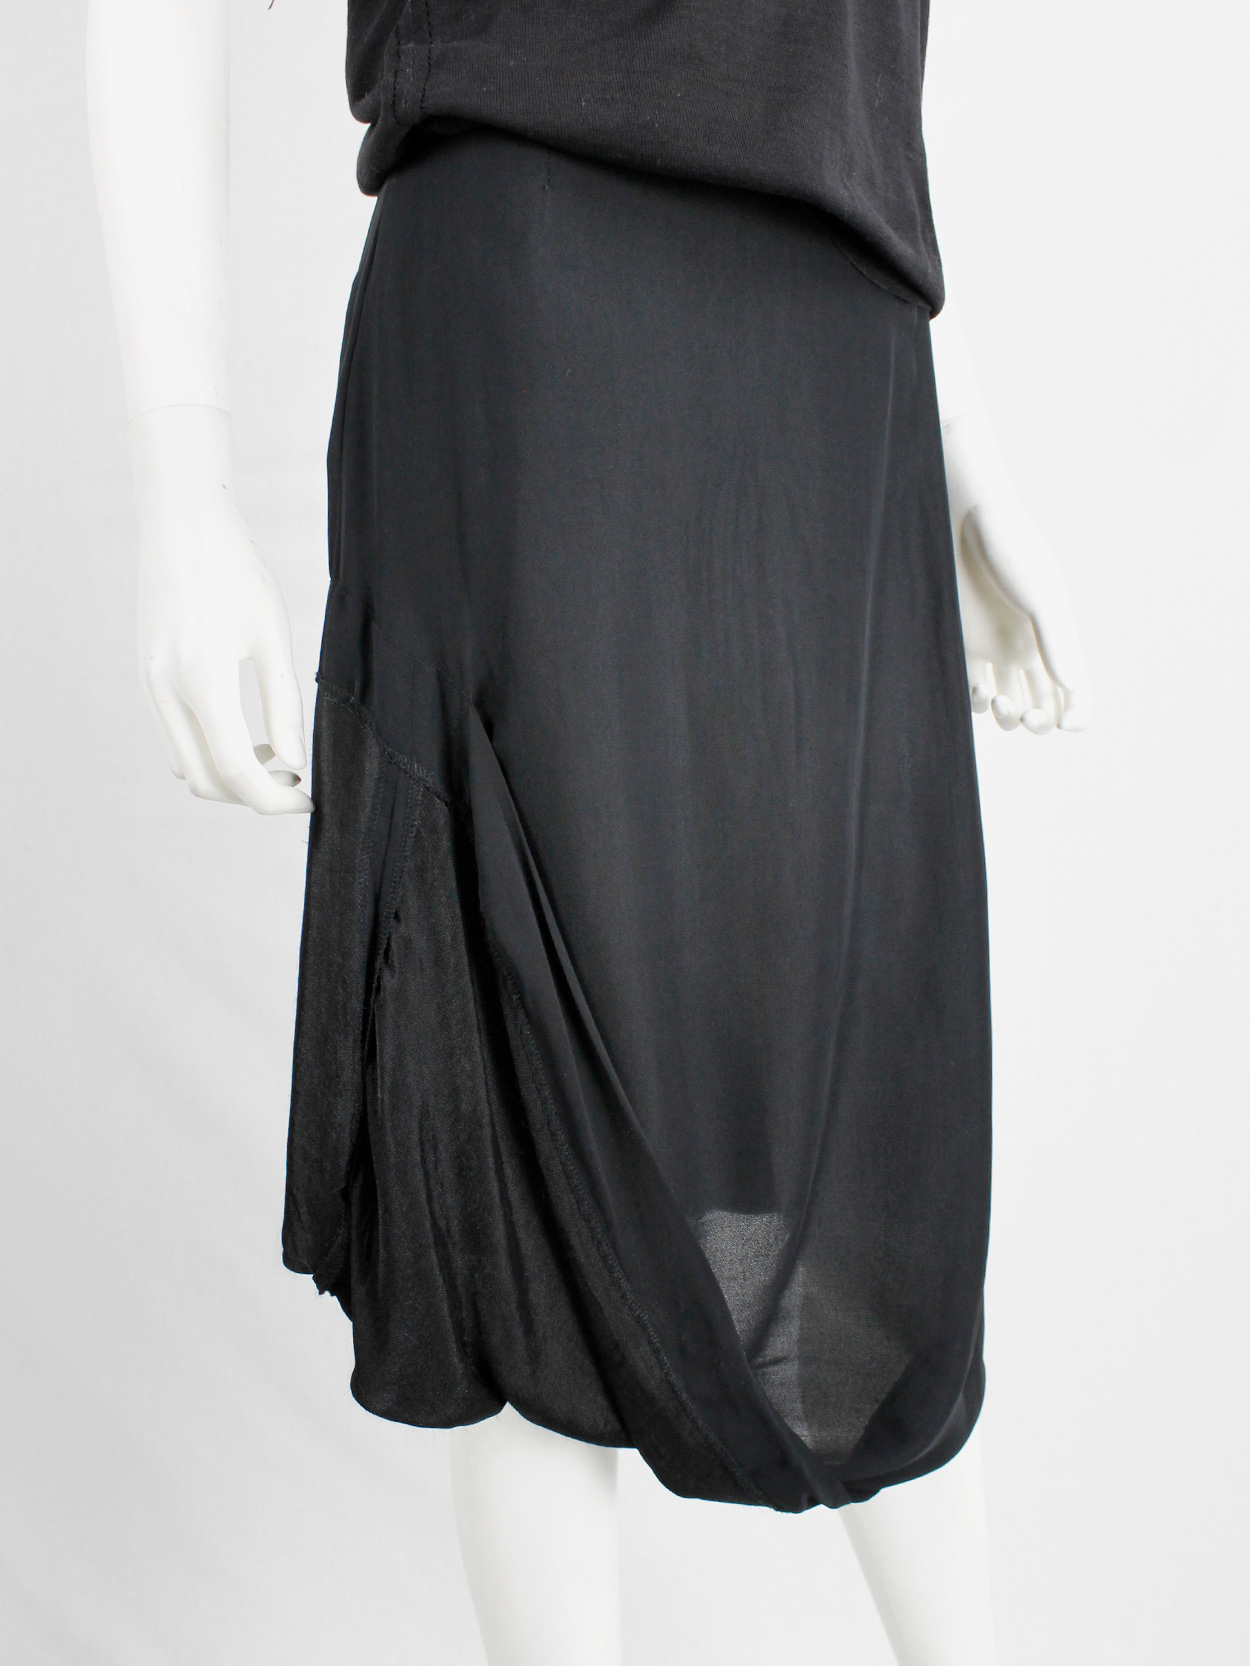 Maison Martin Margiela black partly lifted skirt with exposed lining spring 2003 (11)